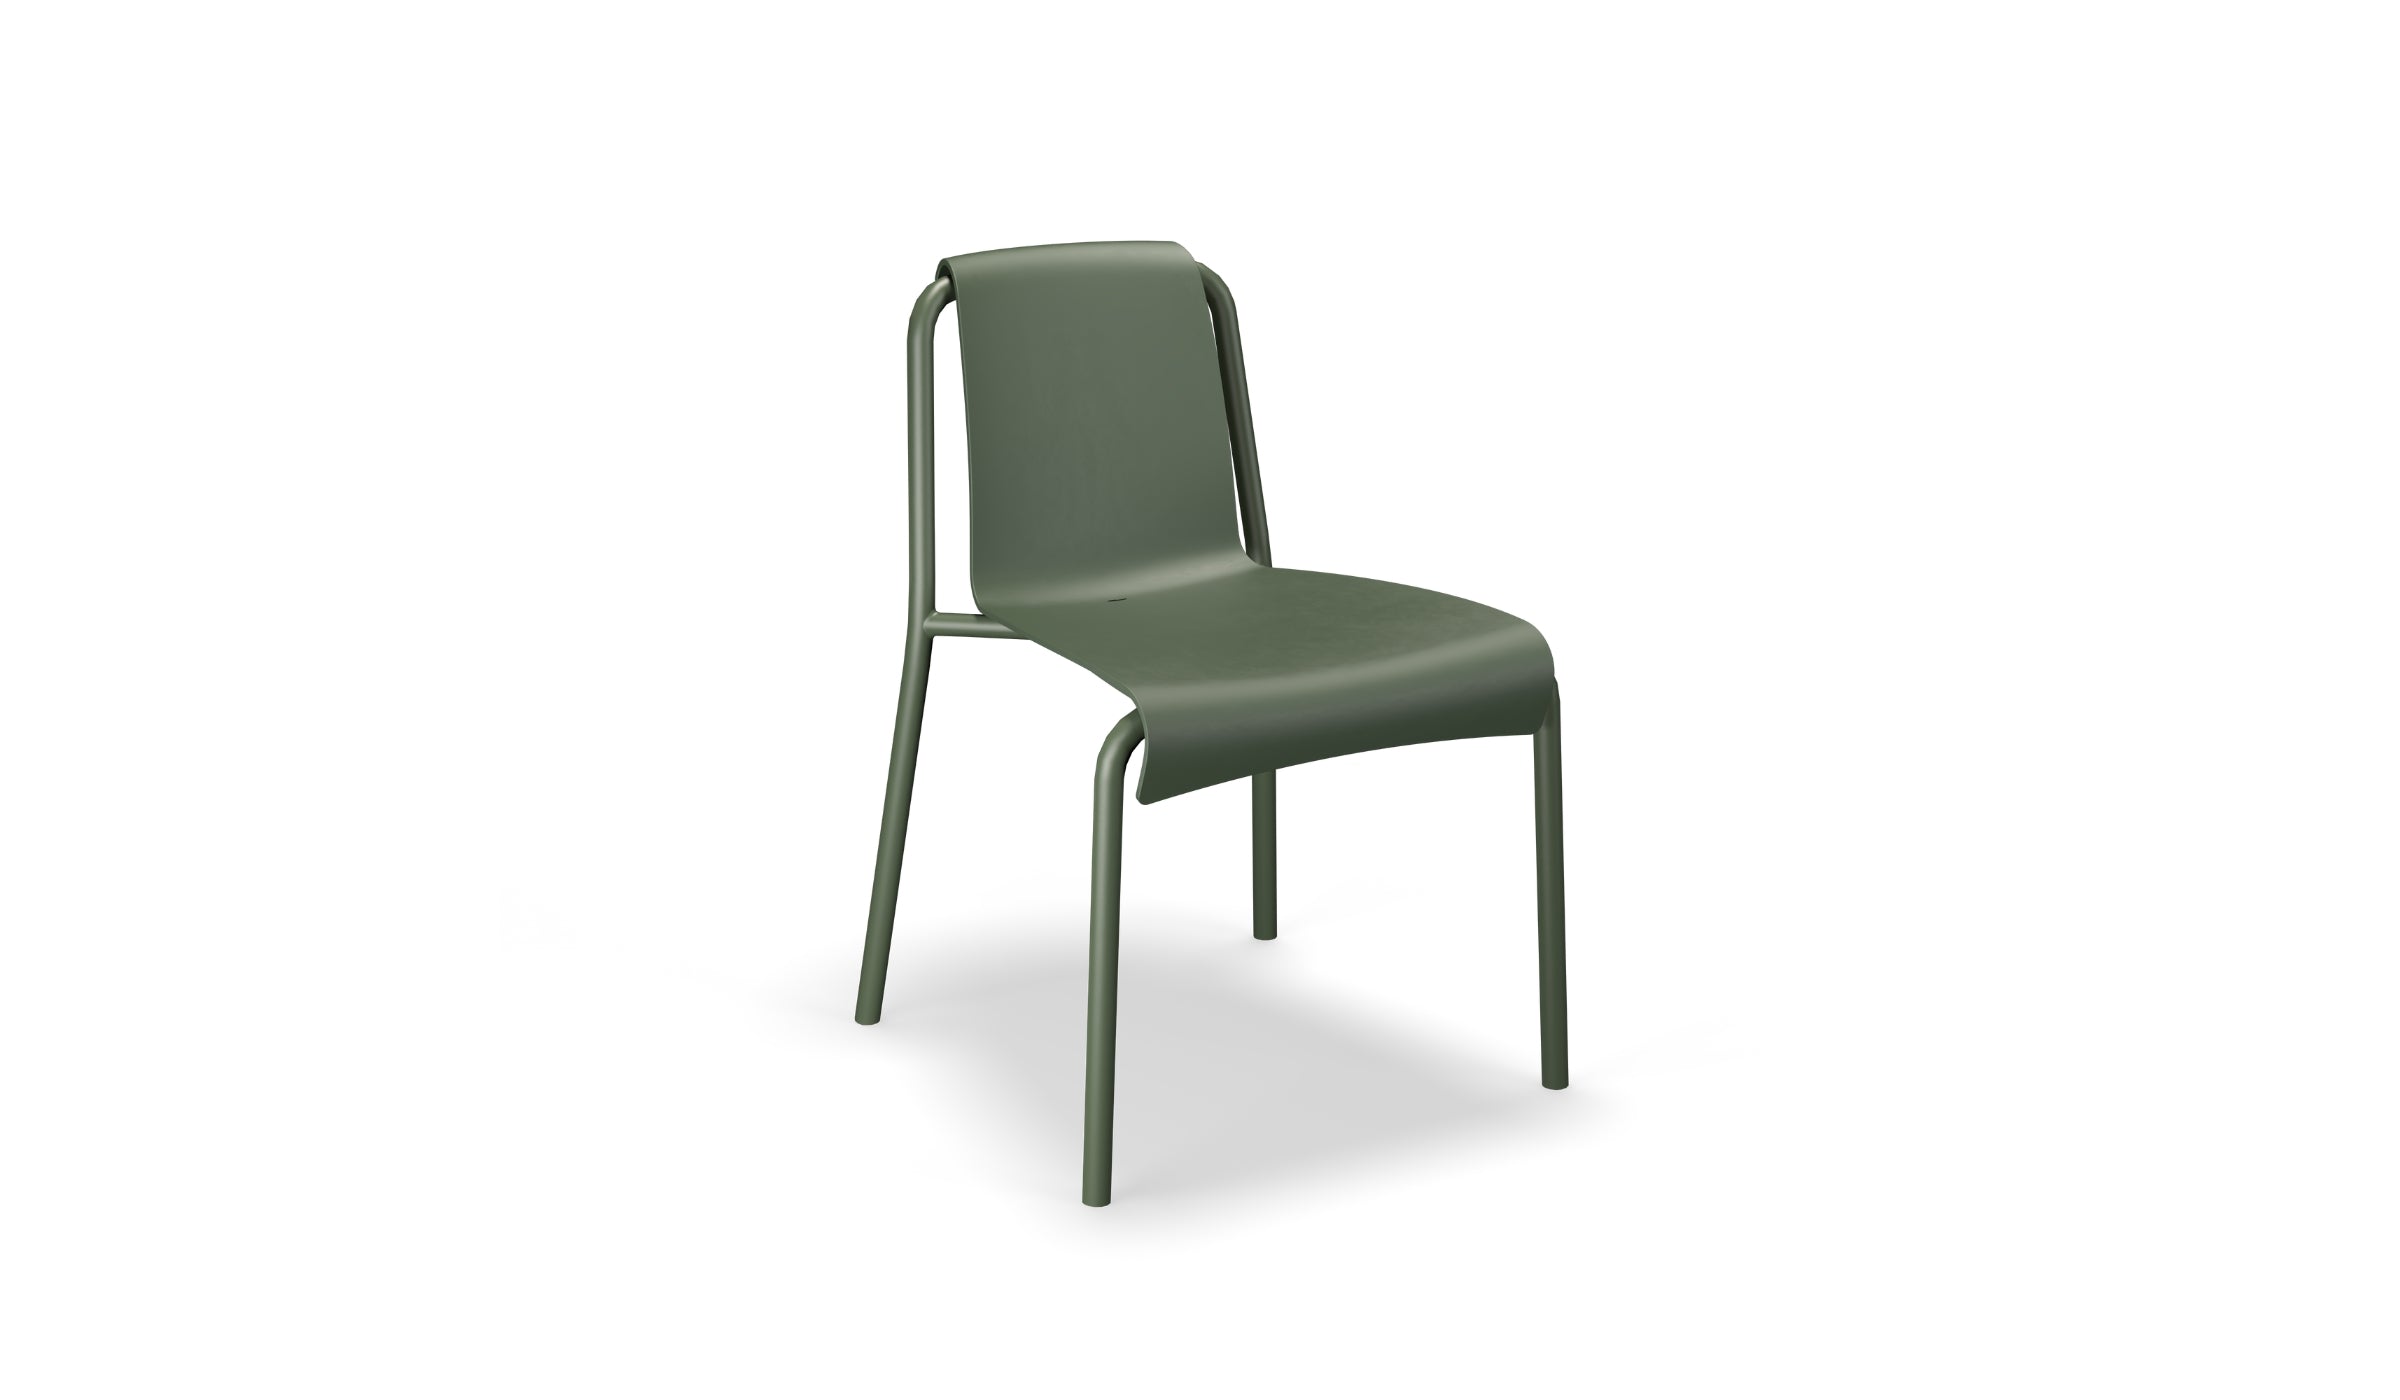 Nami - Designer outdoor chair in recycled plastic, green